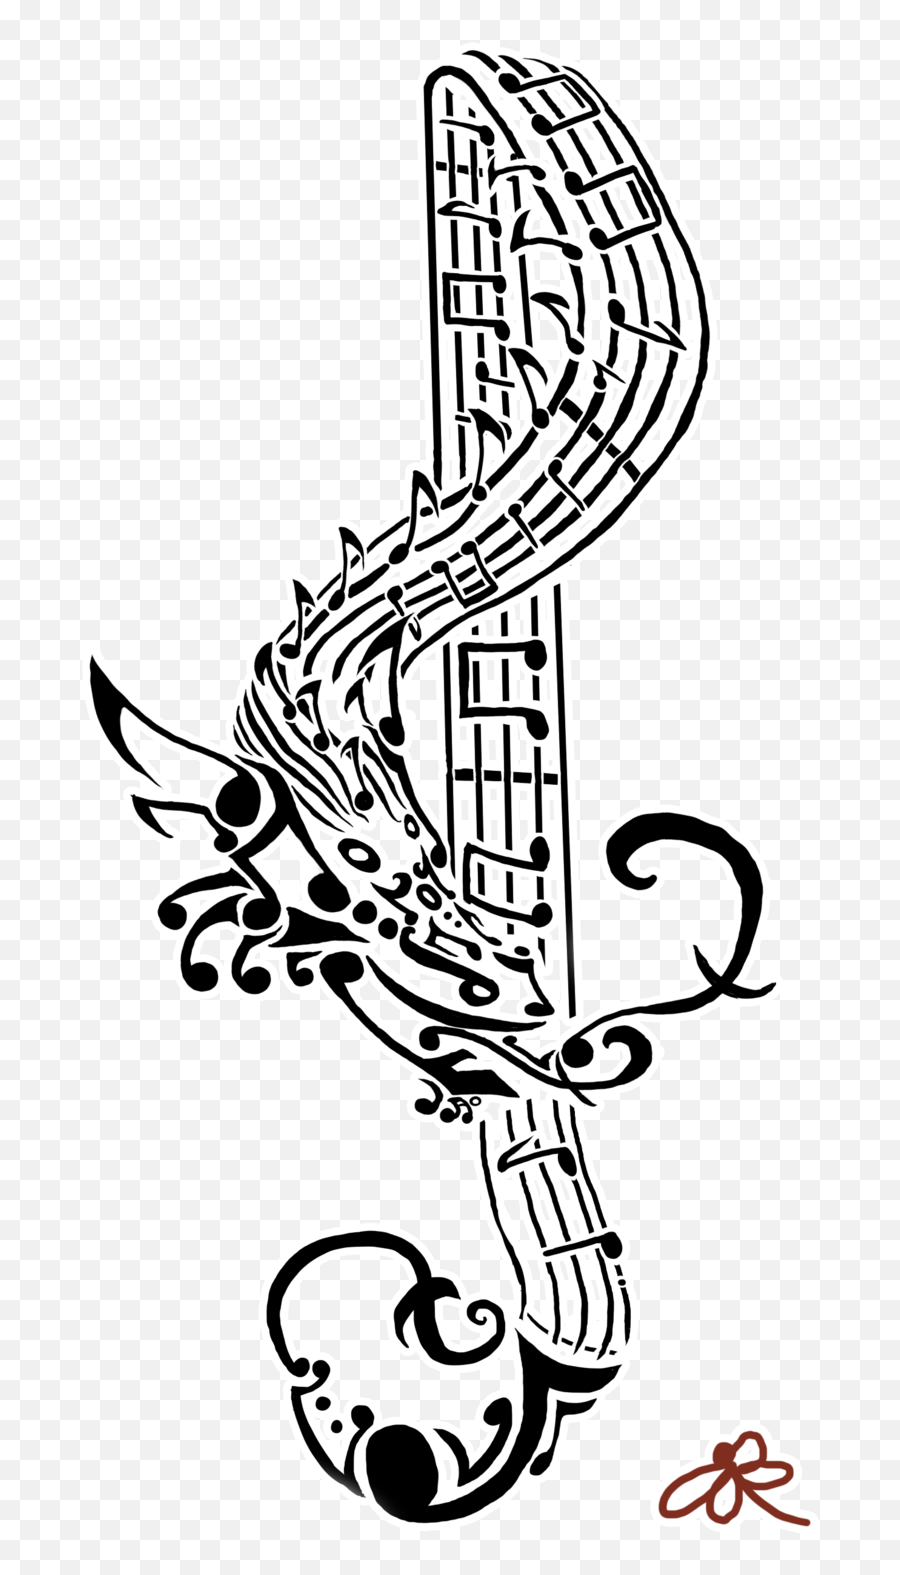 Clef with music notes modern Tribal Tattoo Style  Poster for Sale by  ChristineKrahl  Redbubble